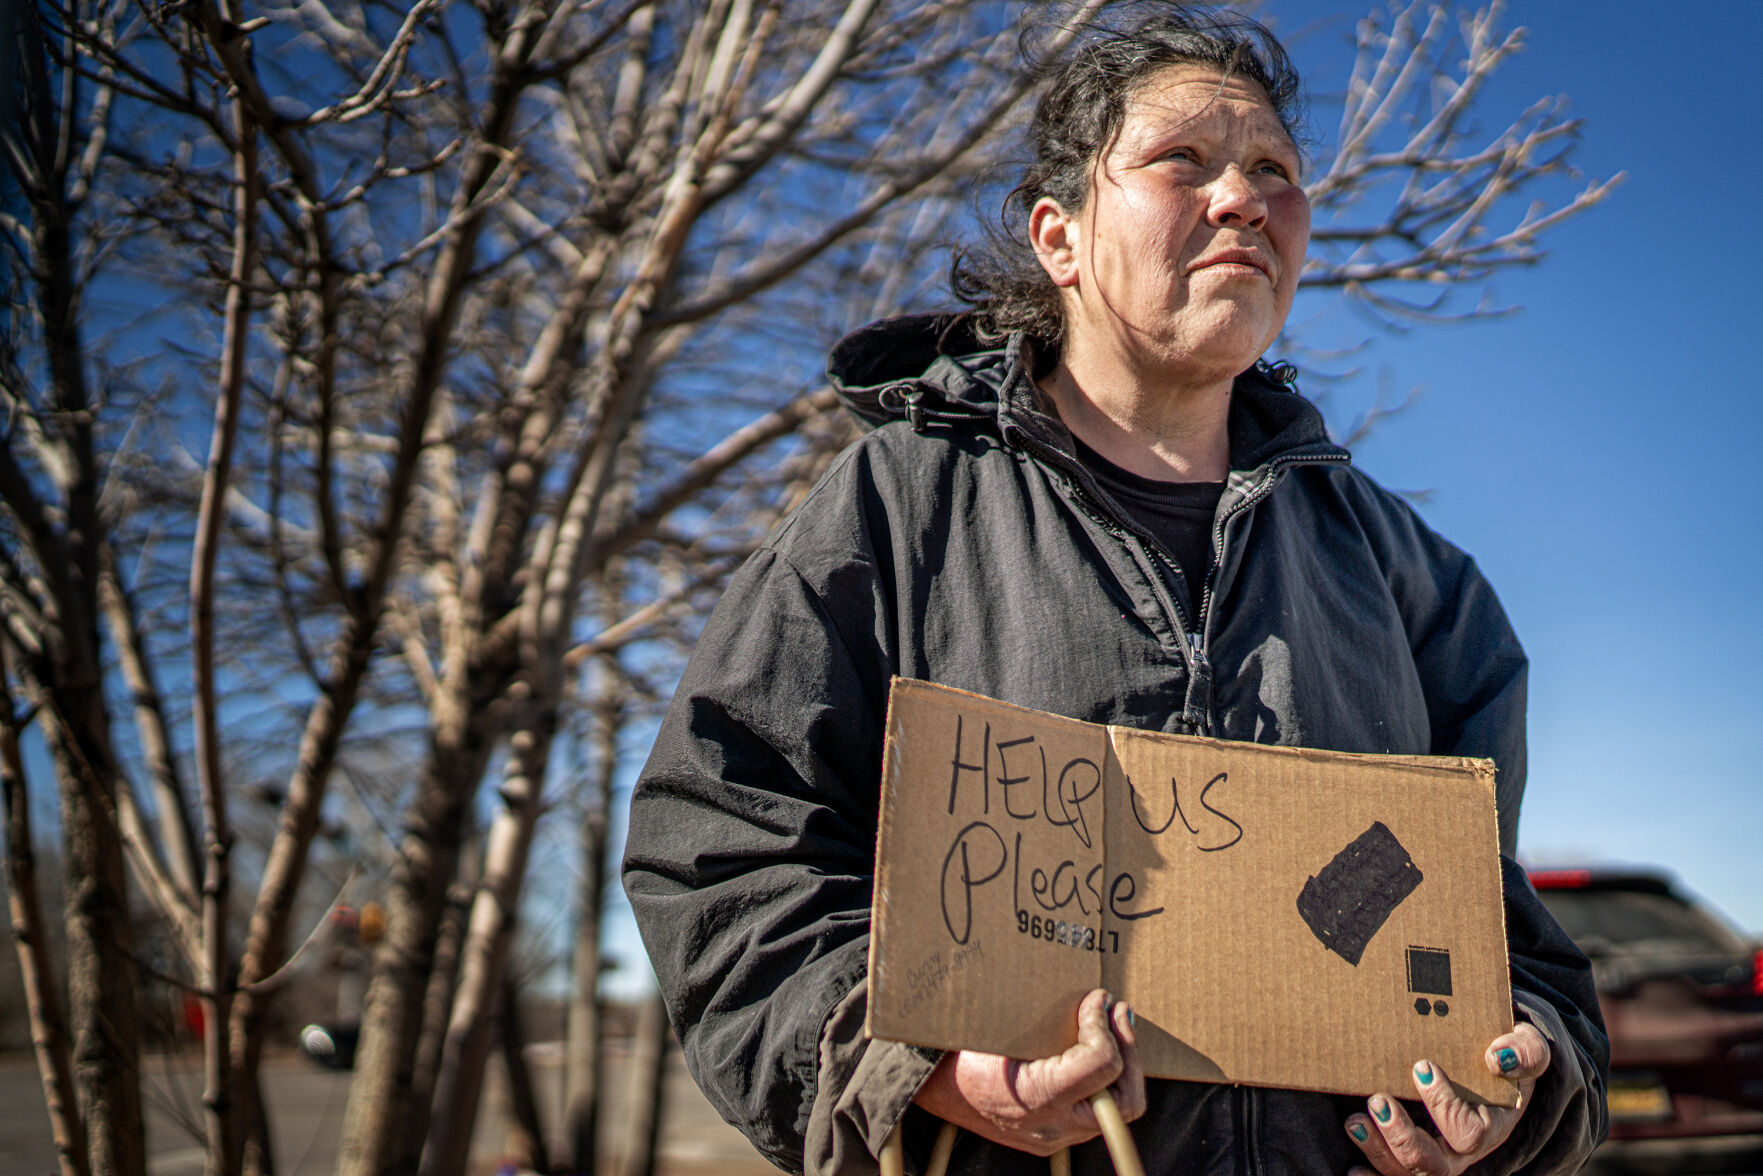 Governor’s call for panhandling crackdown raises concerns